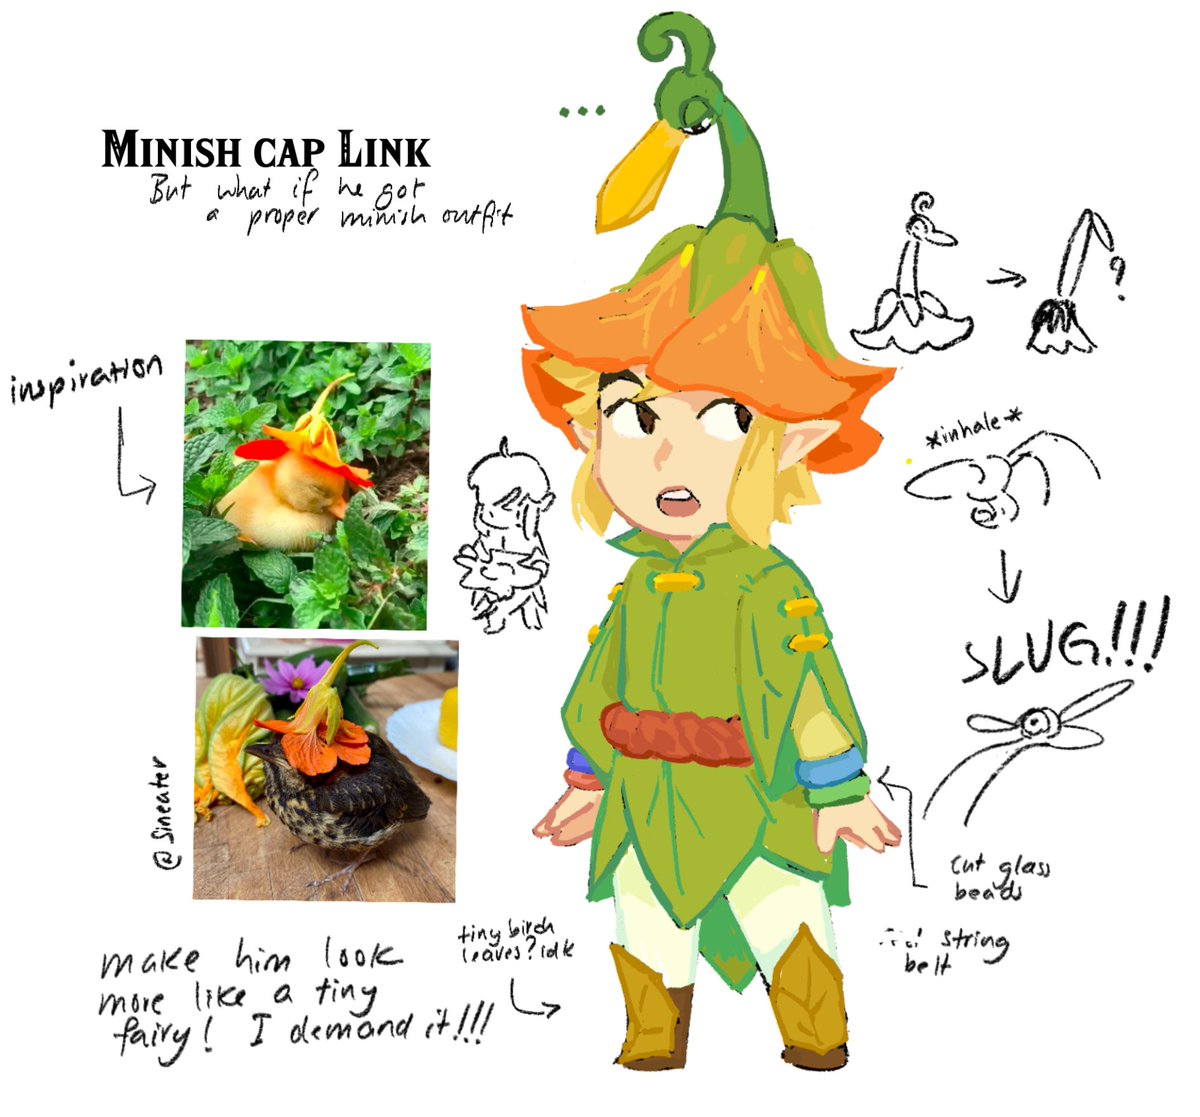 Minish cap Link redesign but more like what if he got a proper minish outfit. So I plonked a flower on his head, gave him a leaf coat and dumb leaf boots 